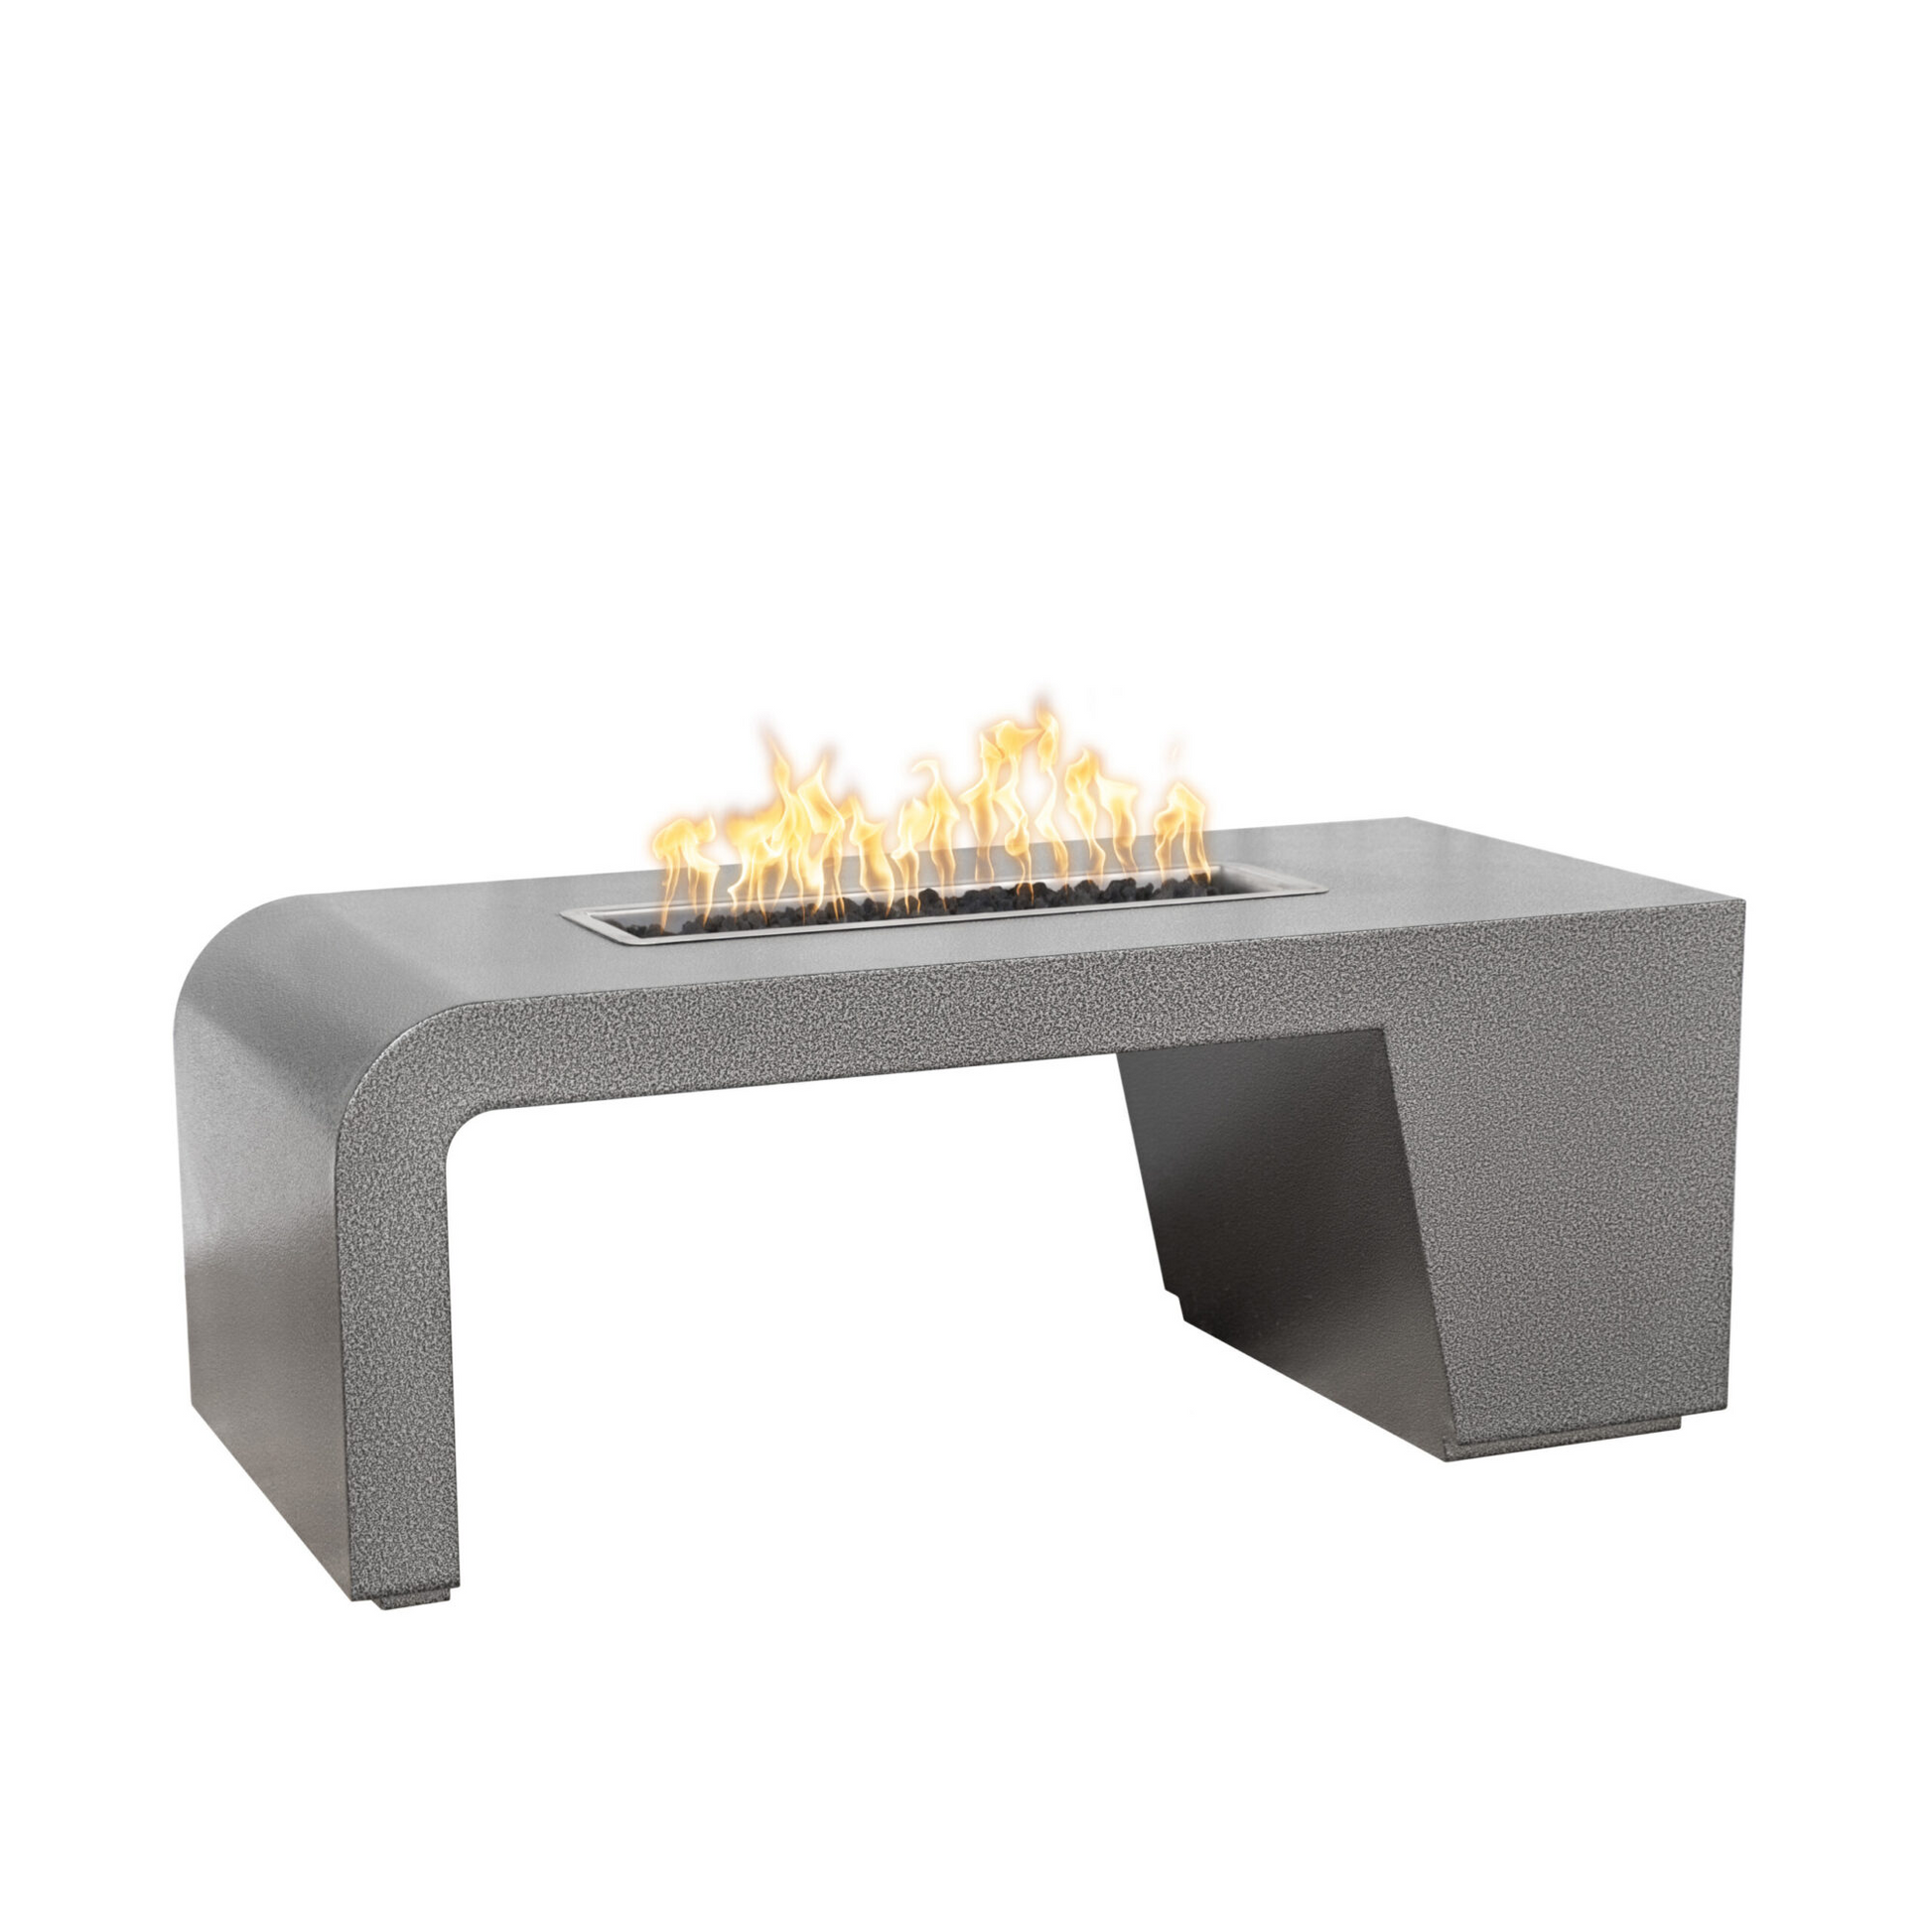 The Outdoor Plus 60" Metal Maywood Powder Coated Fire Pit